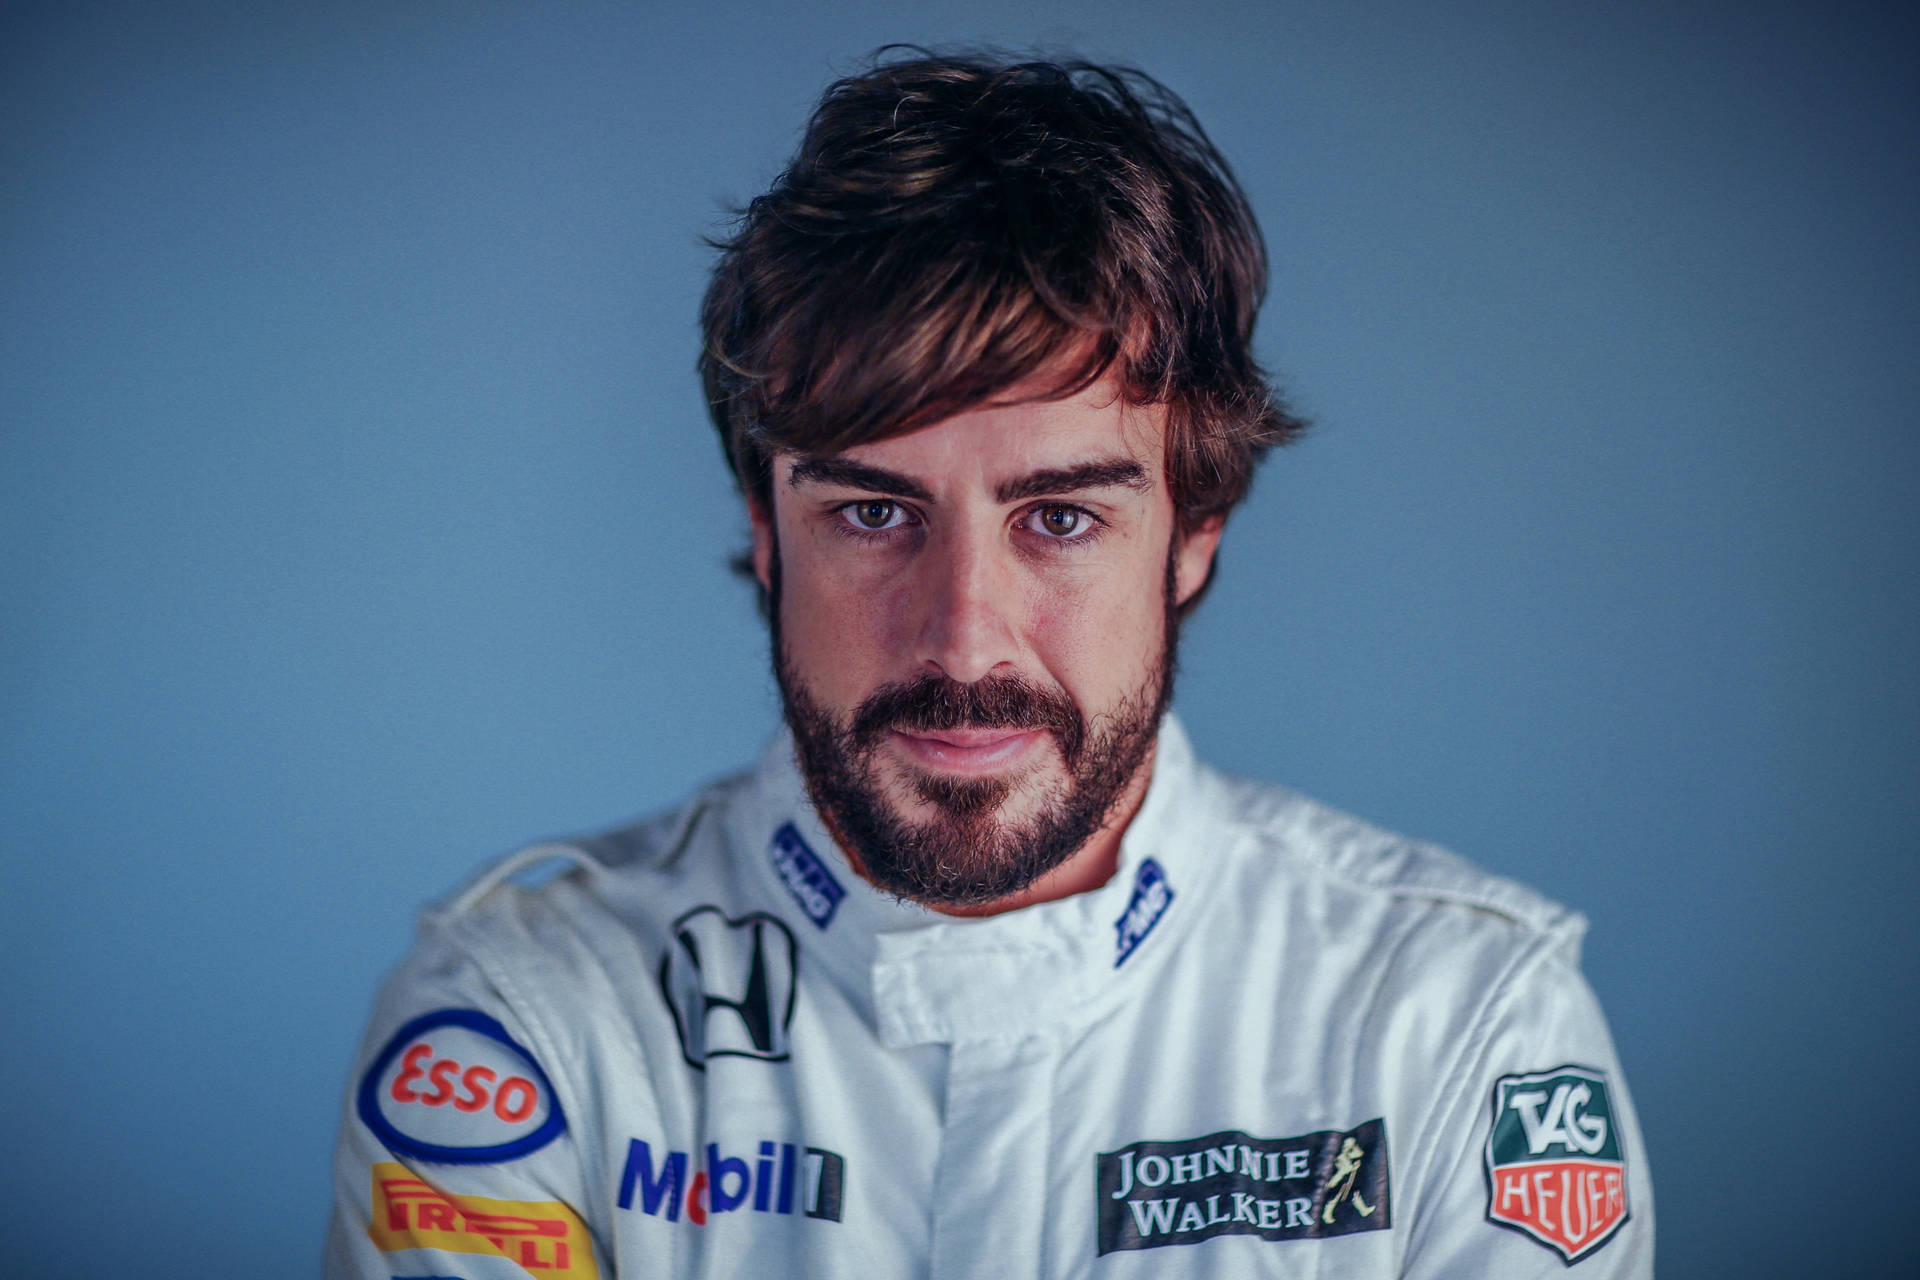 Fernando Alonso Geared Up in His Bright White Racing Suit Wallpaper